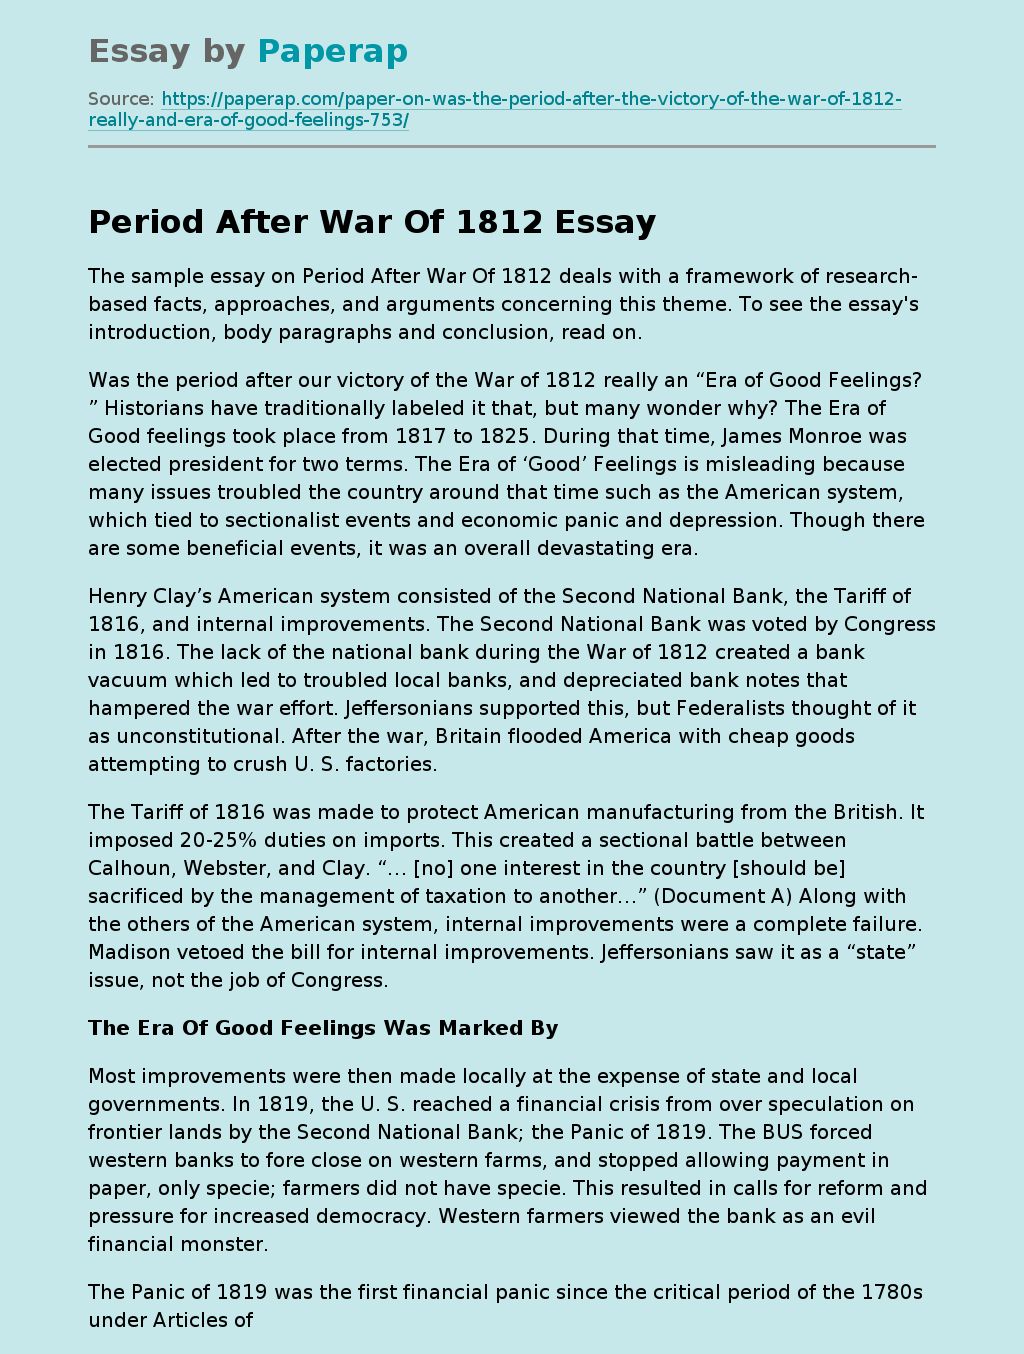 Sample Essay on Period After War of 1812